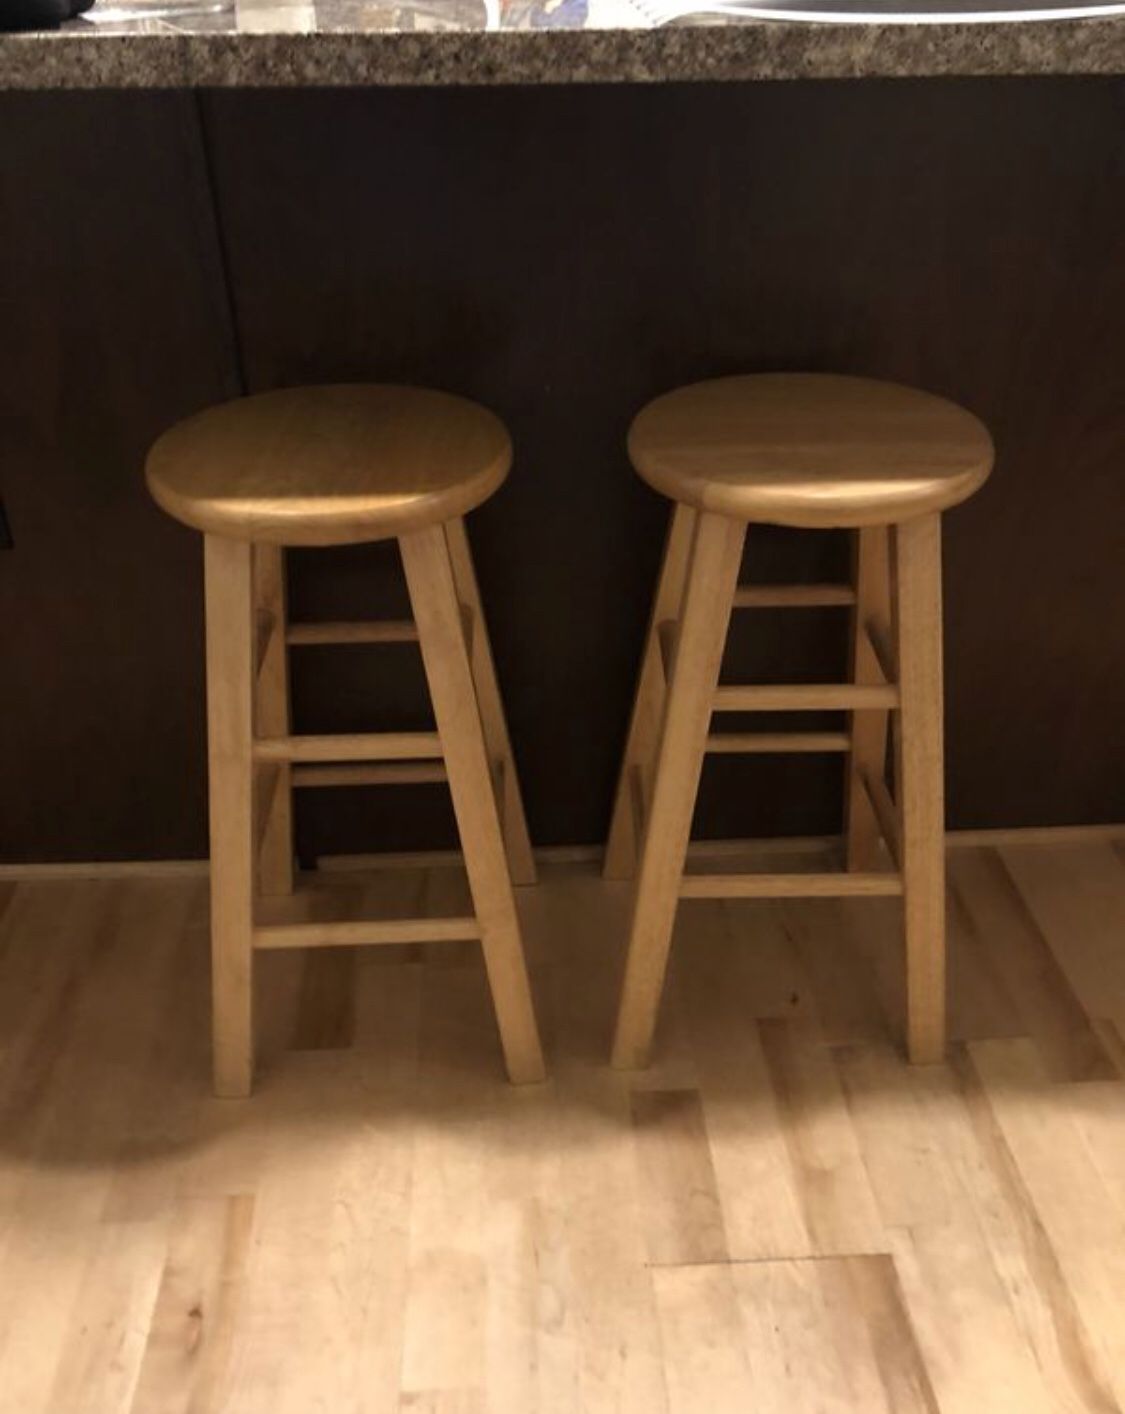 Barstools 2 for $20